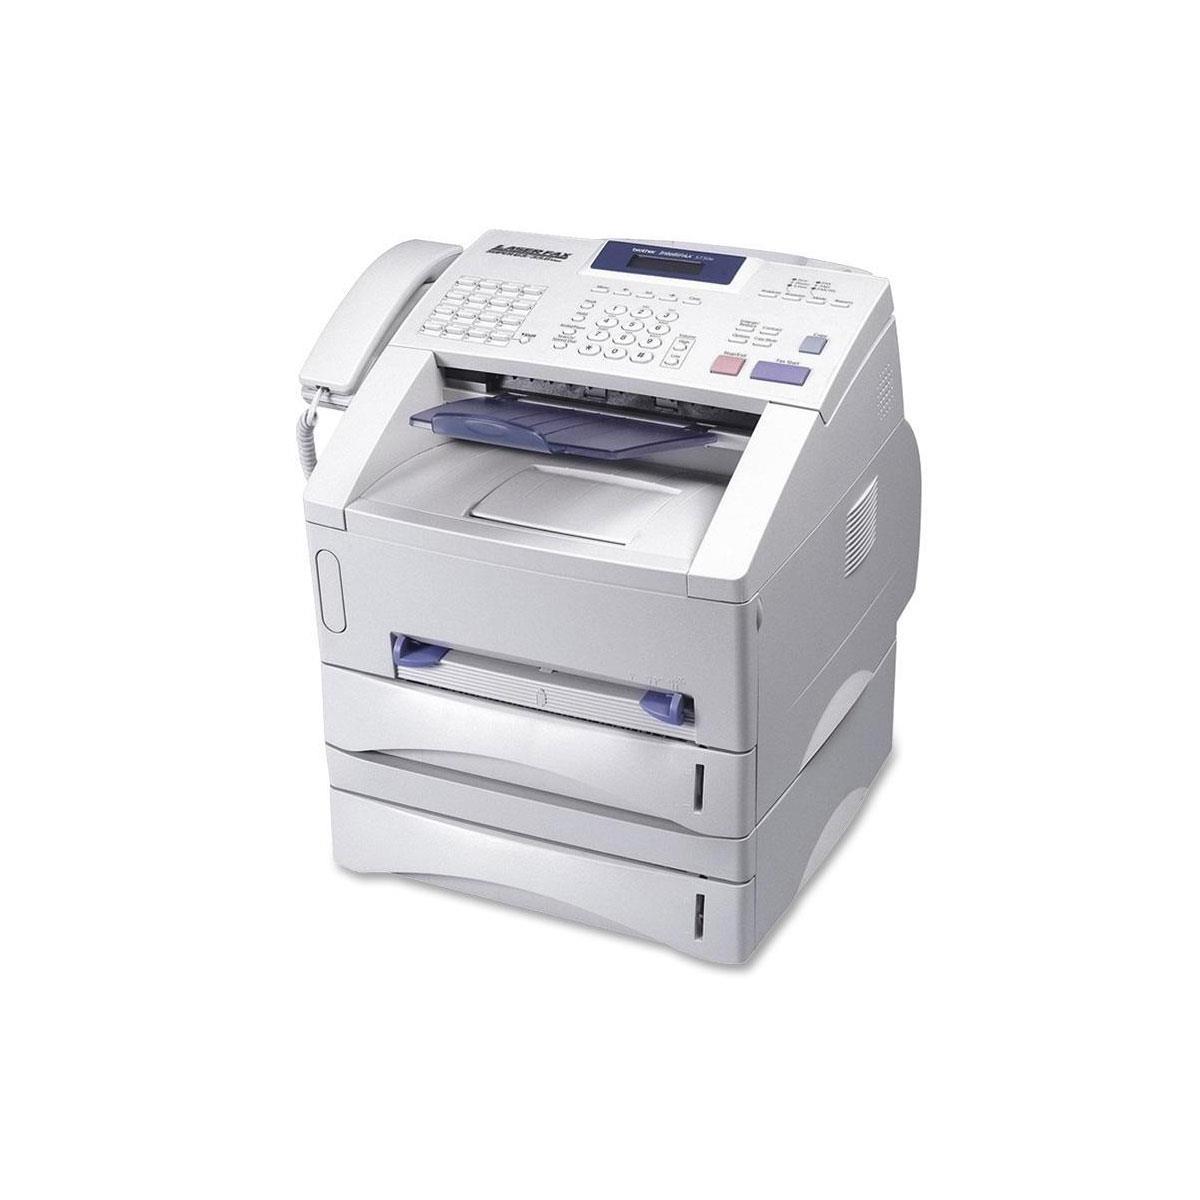 Image of Brother IntelliFax-5750e Laser Fax